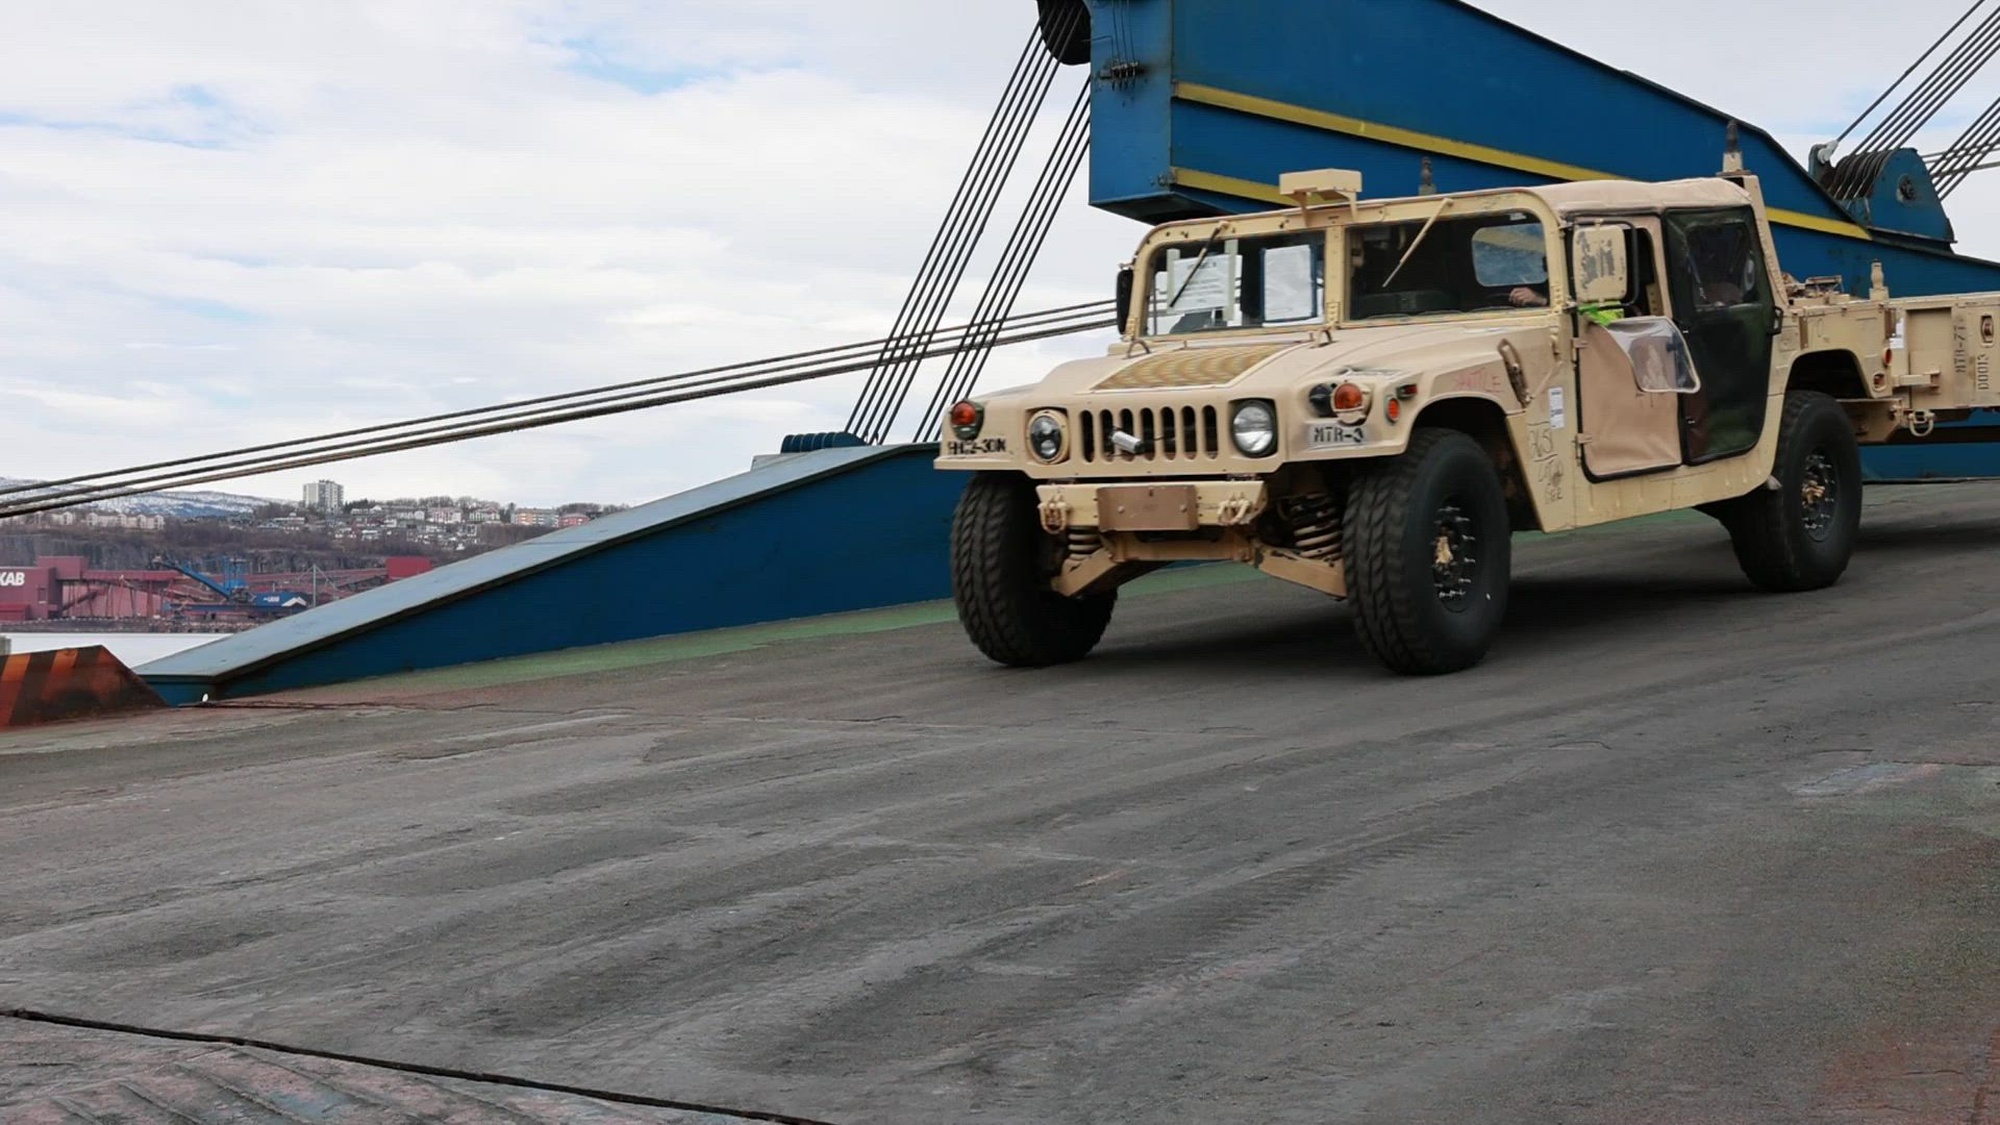 U.S. Army, U.S. Navy, Norwegian army, and Finnish army work cohesively during a U.S. led multinational port operations in Narvik, Norway, on April 24, 2024. Service Members discharged vehicles and equipment, efficiently executing its reception, staging and onward movement (RSOM) as part of DEFENDER. DEFENDER is the Dynamic Employment of Forces to Europe for NATO Deterrence and Enhanced Readiness, and is a U.S. European Command-scheduled, U.S. Army Europe and Africa-conducted exercise that consists of Saber Strike, Immediate Response, and Swift Response. DEFENDER 24 is linked to NATO’s Steadfast Defender exercise, and DoD’s Large Scale Global Exercise, taking place from 28 March to 31 May. DEFENDER 24 is the largest U.S. Army exercise in Europe and includes more than 17,000 U.S. and 23,000 multinational service members from more than 20 Allied and partner nations, including Croatia, Czechia, Denmark, Estonia, Finland, France, Germany, Georgia, Hungary, Italy, Latvia, Lithuania, Moldova, Netherlands, North Macedonia, Norway, Poland, Romania, Slovakia, Spain, Sweden, and the United Kingdom.  (U.S. Army video by Spc. Samuel Signor)